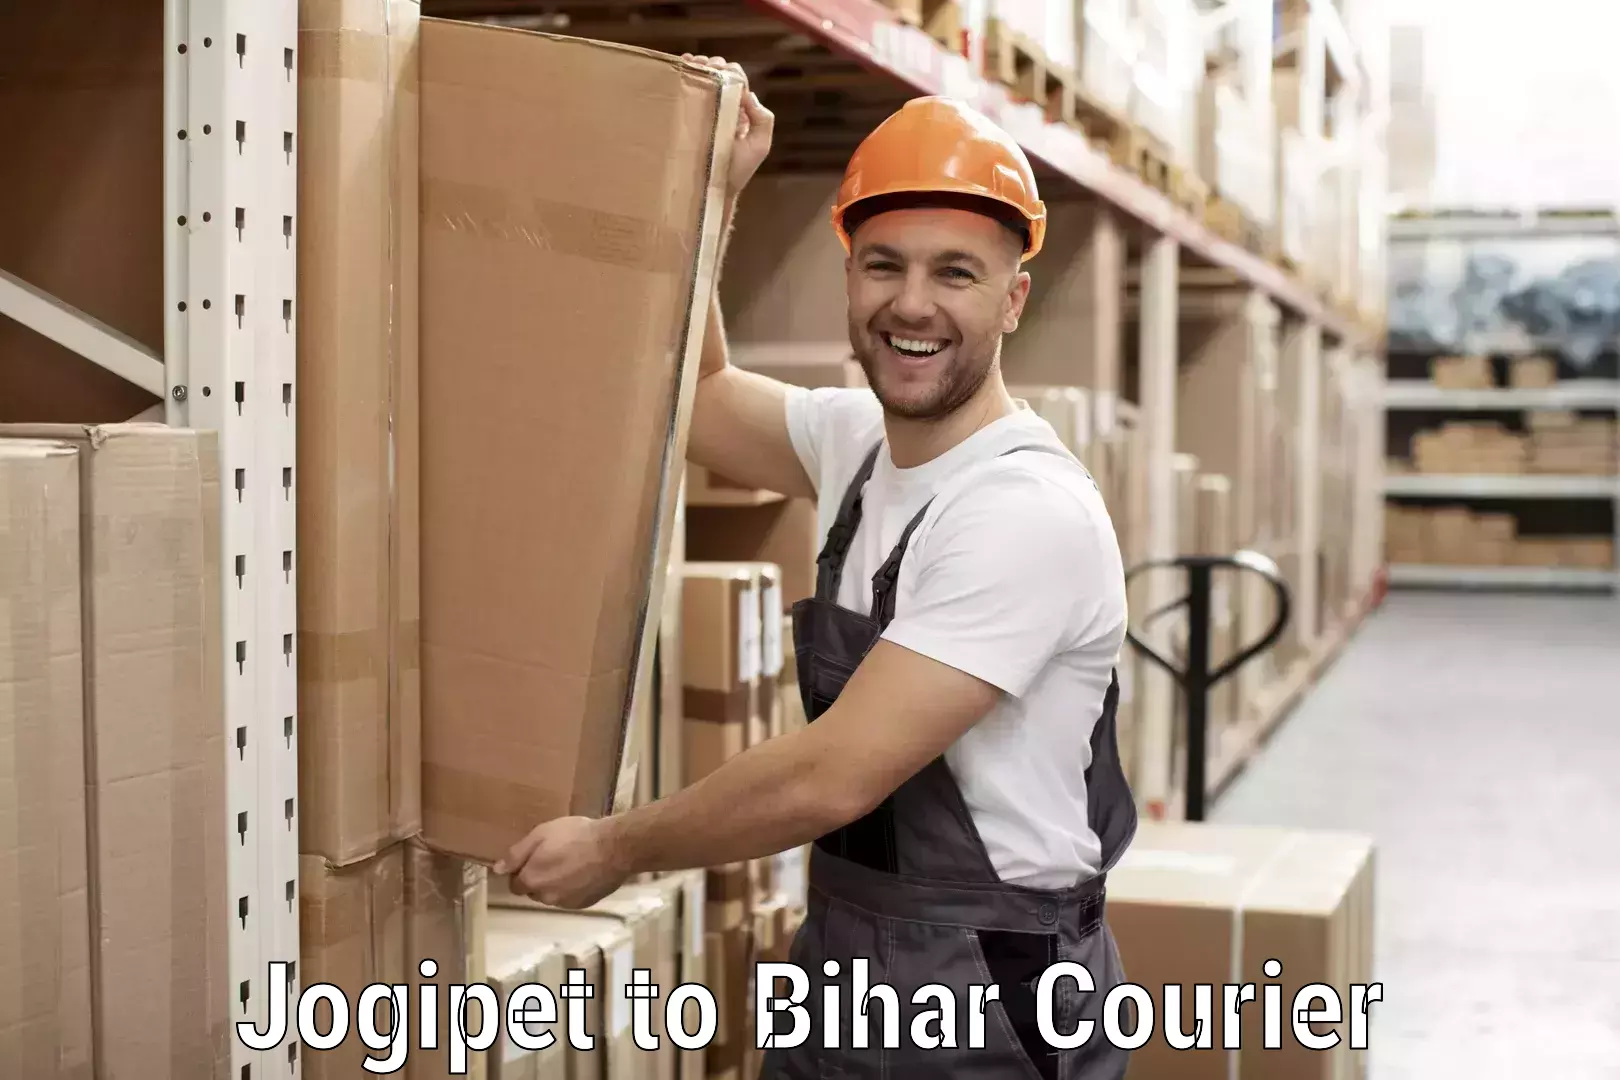 Ocean freight courier Jogipet to Giddha